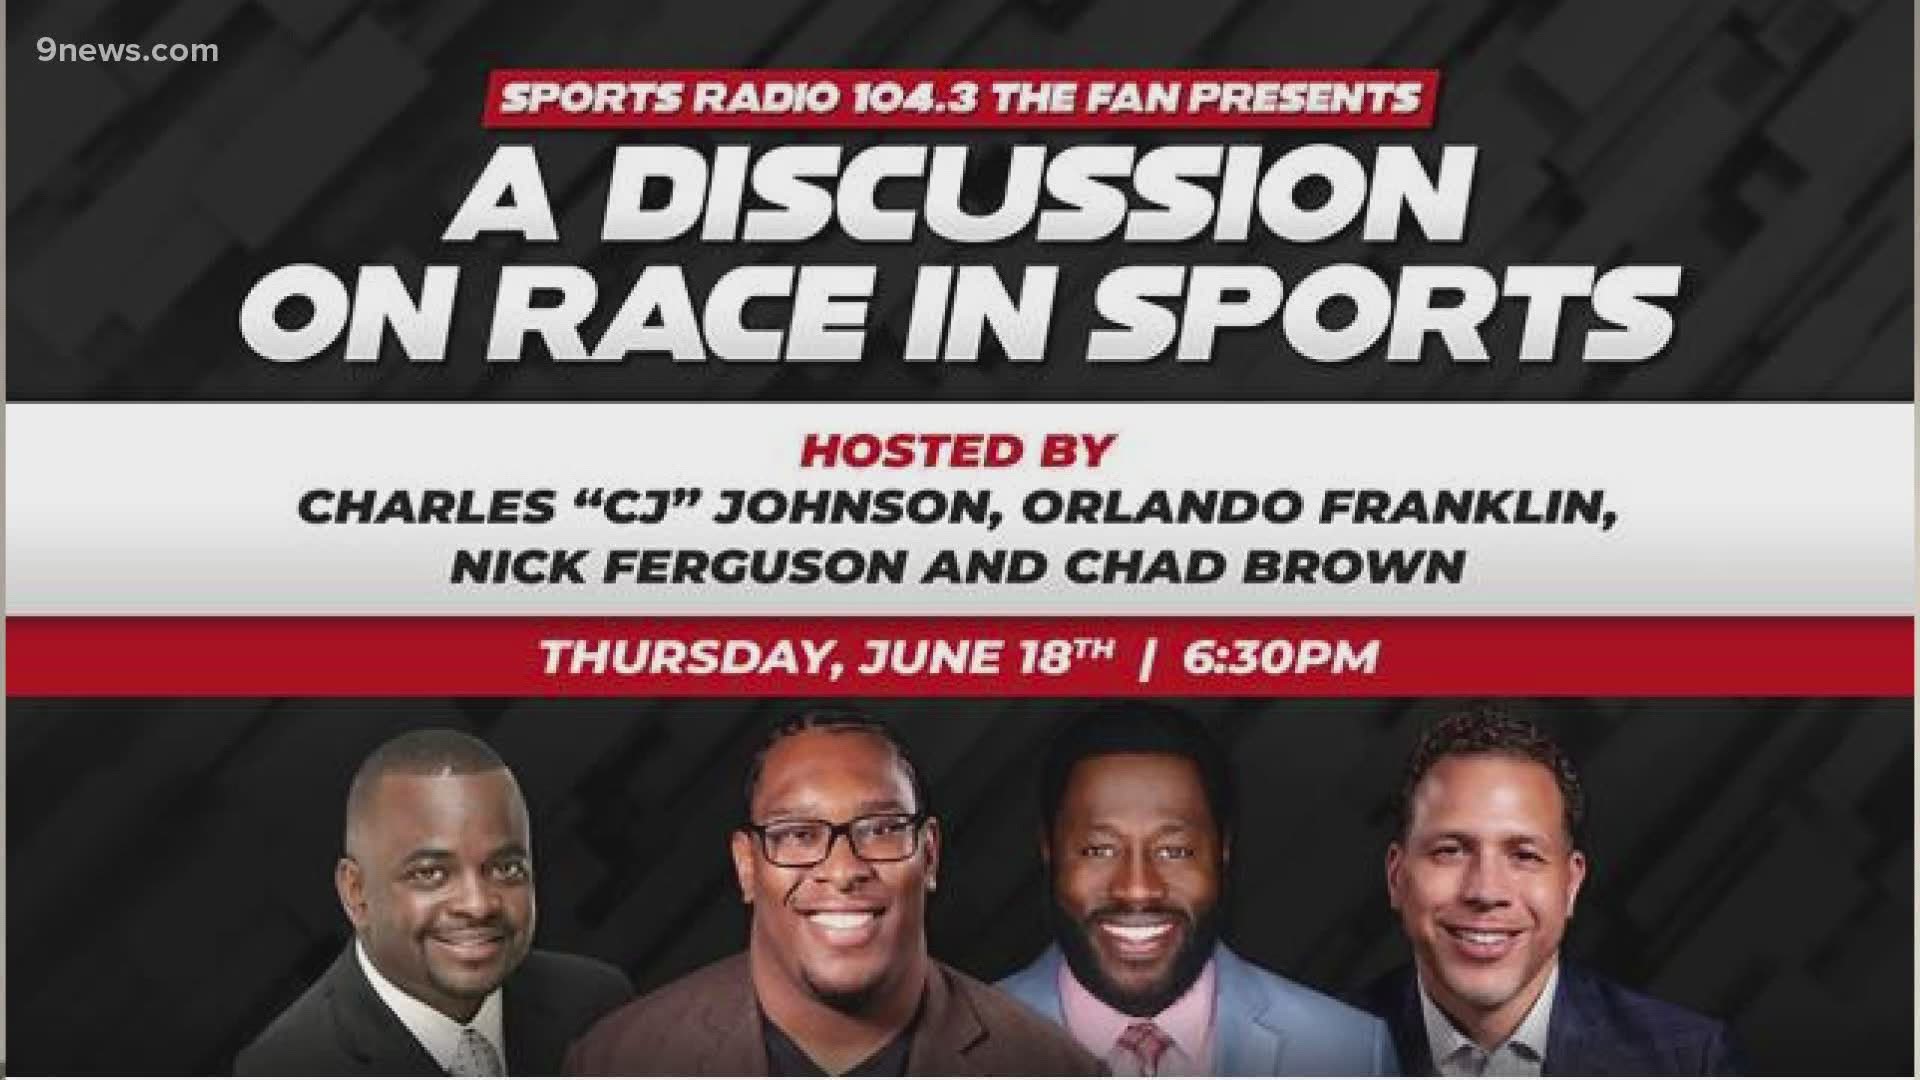 On Thursday 104.3 The Fan in Denver will hold a panel discussion on racism in sports, hosted by Charles "CJ" Johnson, Orlando Franklin, Nick Ferguson and Chad Brown.